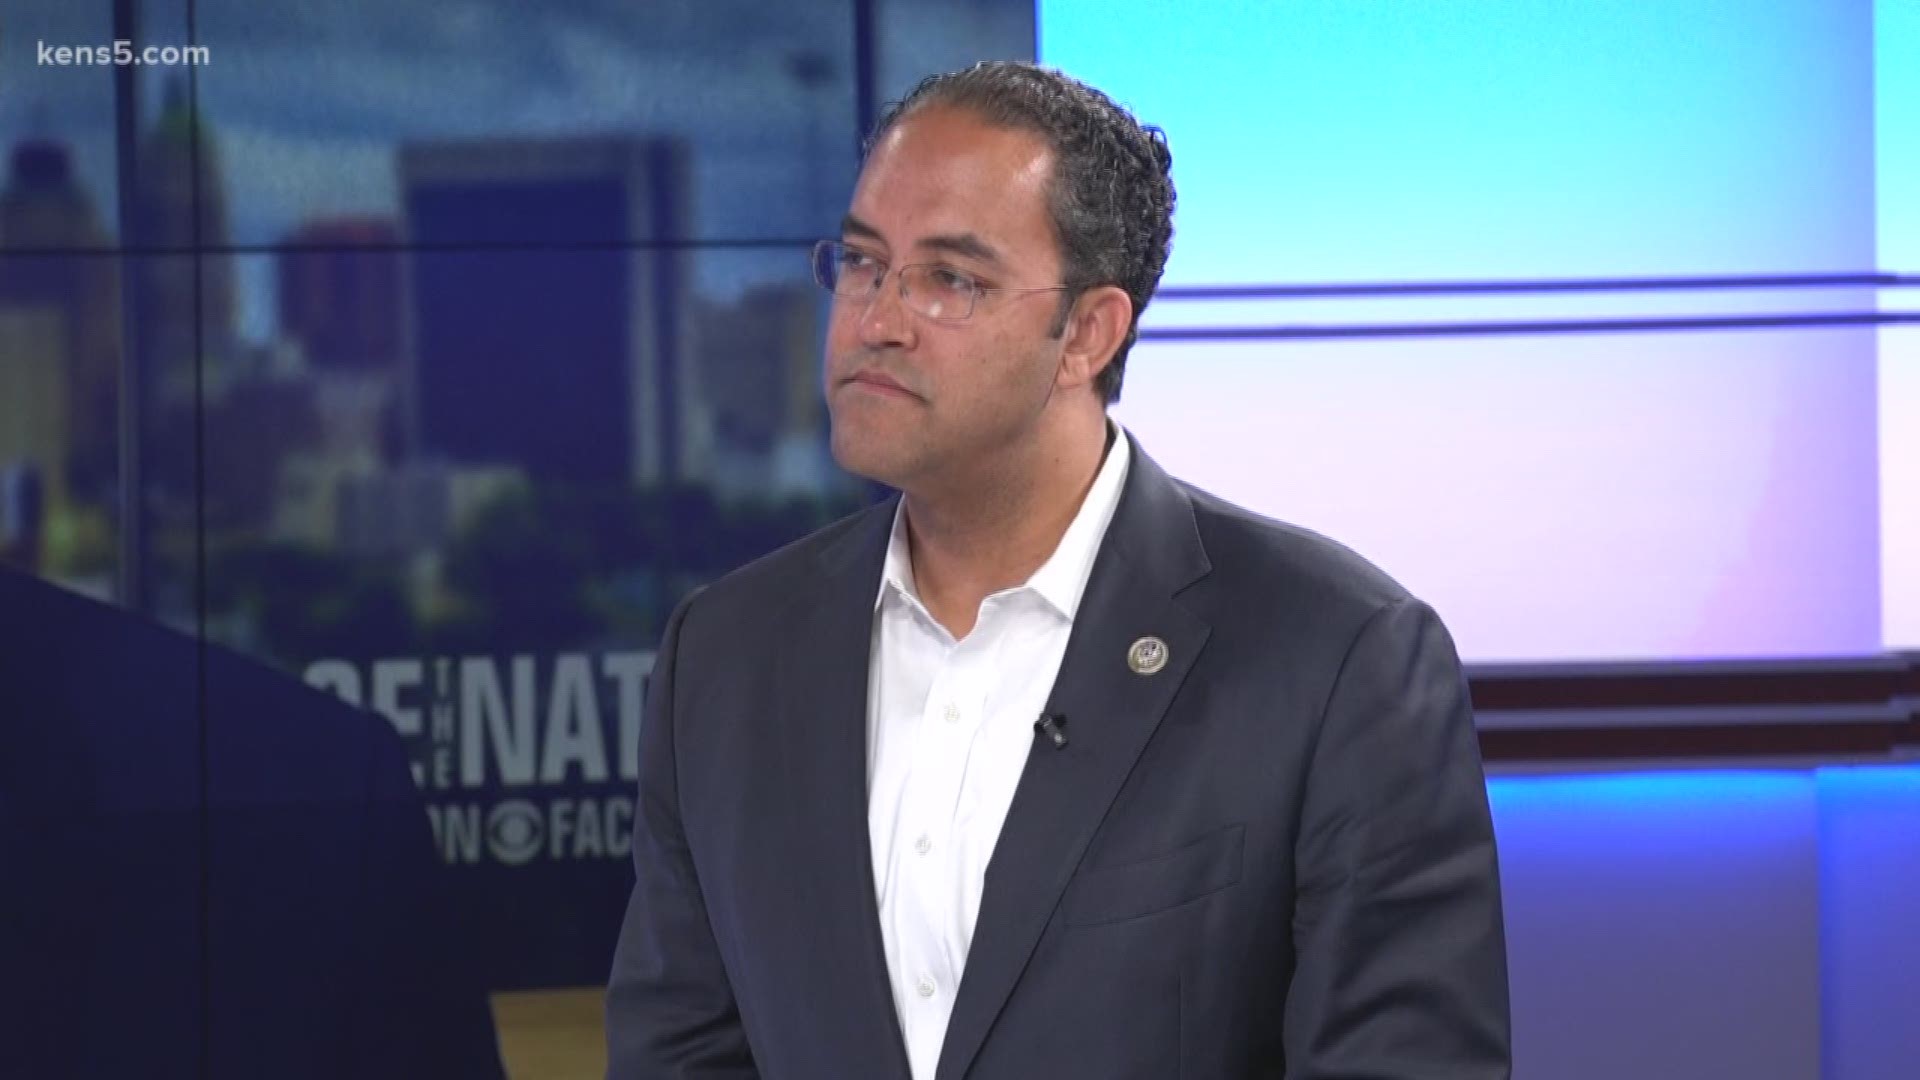 Congressman Will Hurd is up for re-election this November.